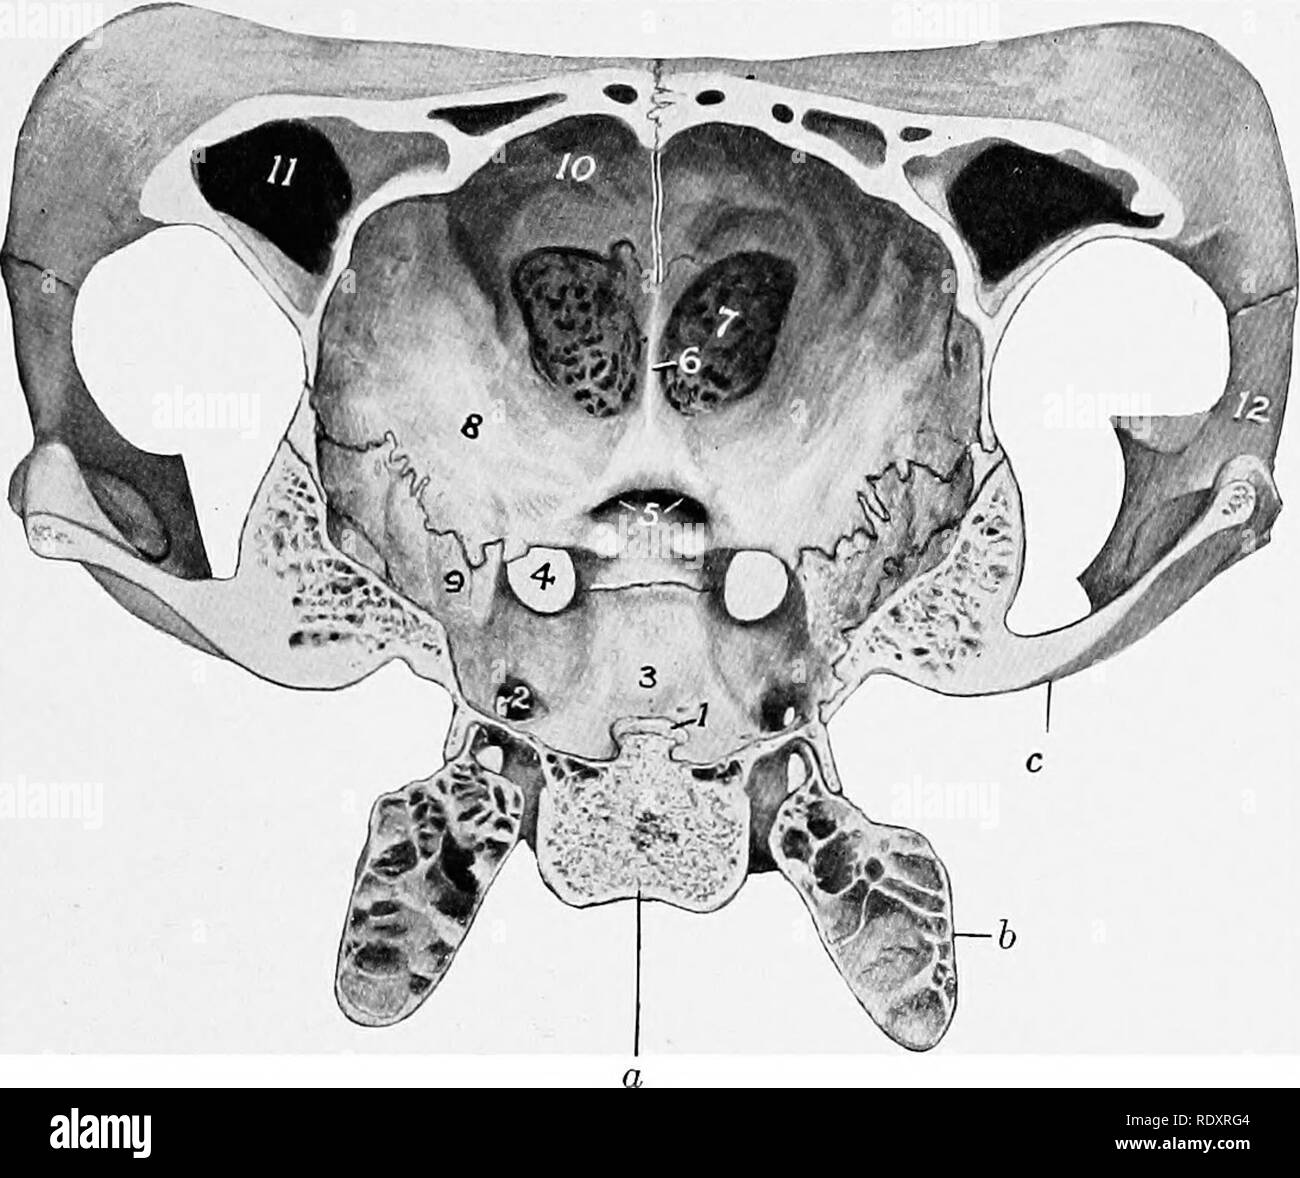 . The anatomy of the domestic animals . Veterinary anatomy. BONES OF THE CRANIUM 133. Fig. 130.—Choss-section of Cranium of Ox. The section cuts the posterior part of the temporal condyle and is viewed from behind, a, Body of sphenoid; b, bulla ossea;- c, temporal condyle; 1, dorsum sellae; 2, foramen ovale; 3, hypophyseal or pituitary fossa; 4, foramen orbito-rotundum; 5. optic foramina; 6, crista galli; 7, cribriform plate of ethmoid; 8, orbital wing of sphenoid; 9, temporal wing of sphenoid; 10, internal plate of frontal bone; 11, frontal sinus; 12, temporal process of malar bone.'. Please  Stock Photo